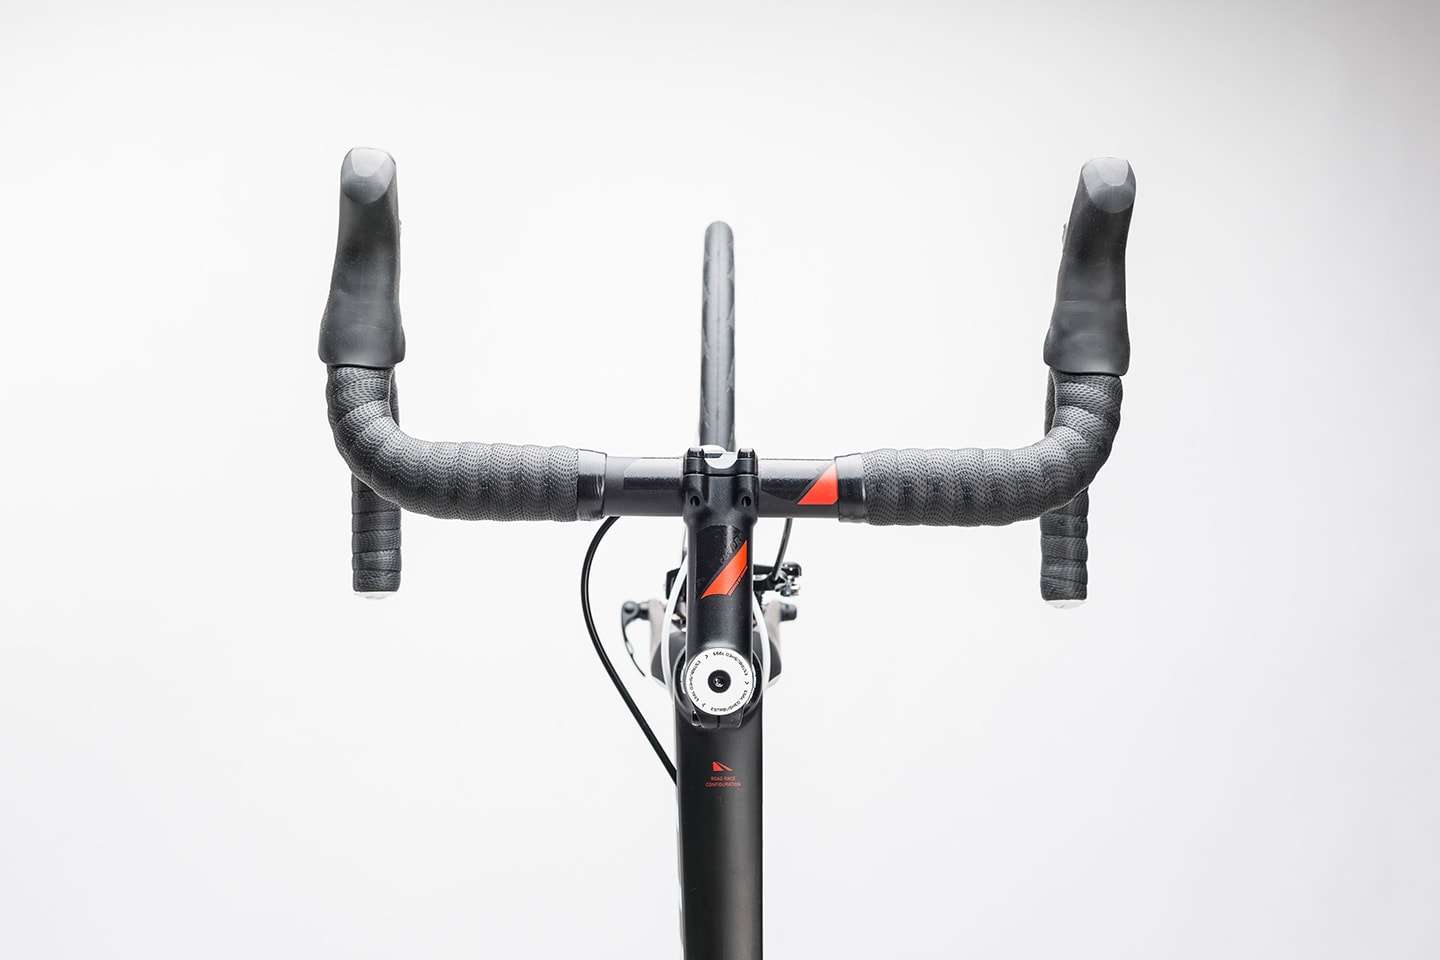 Cube Attain GTC Carbon`n`Red Racefiets